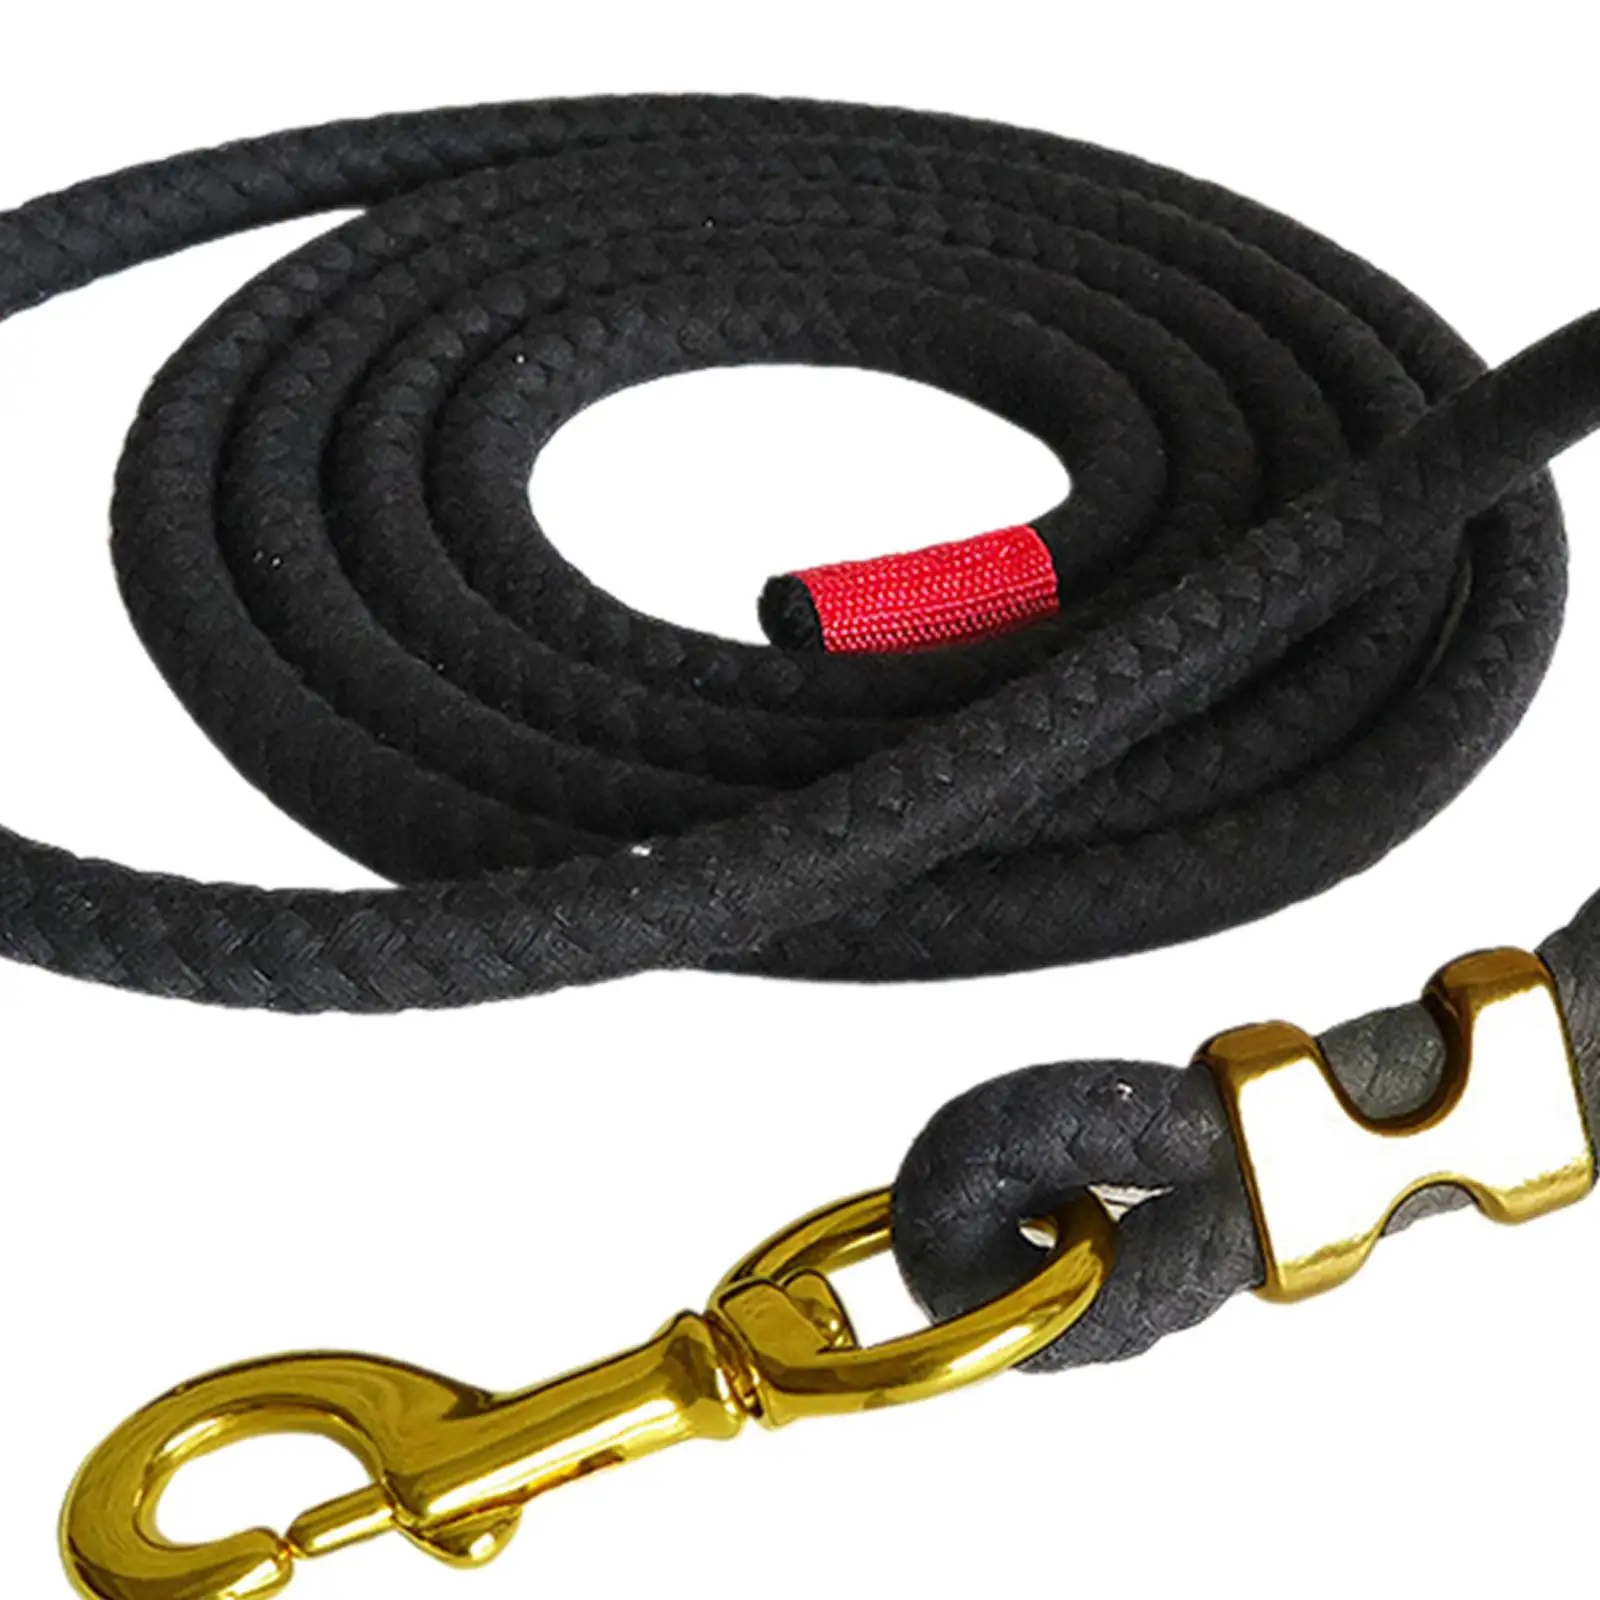 Horse Lead Rope Horse Lunge Line Cord Attach to Halter or Harness Long Heavy Duty with A Solid Brass Snap Webbing Horse Rope